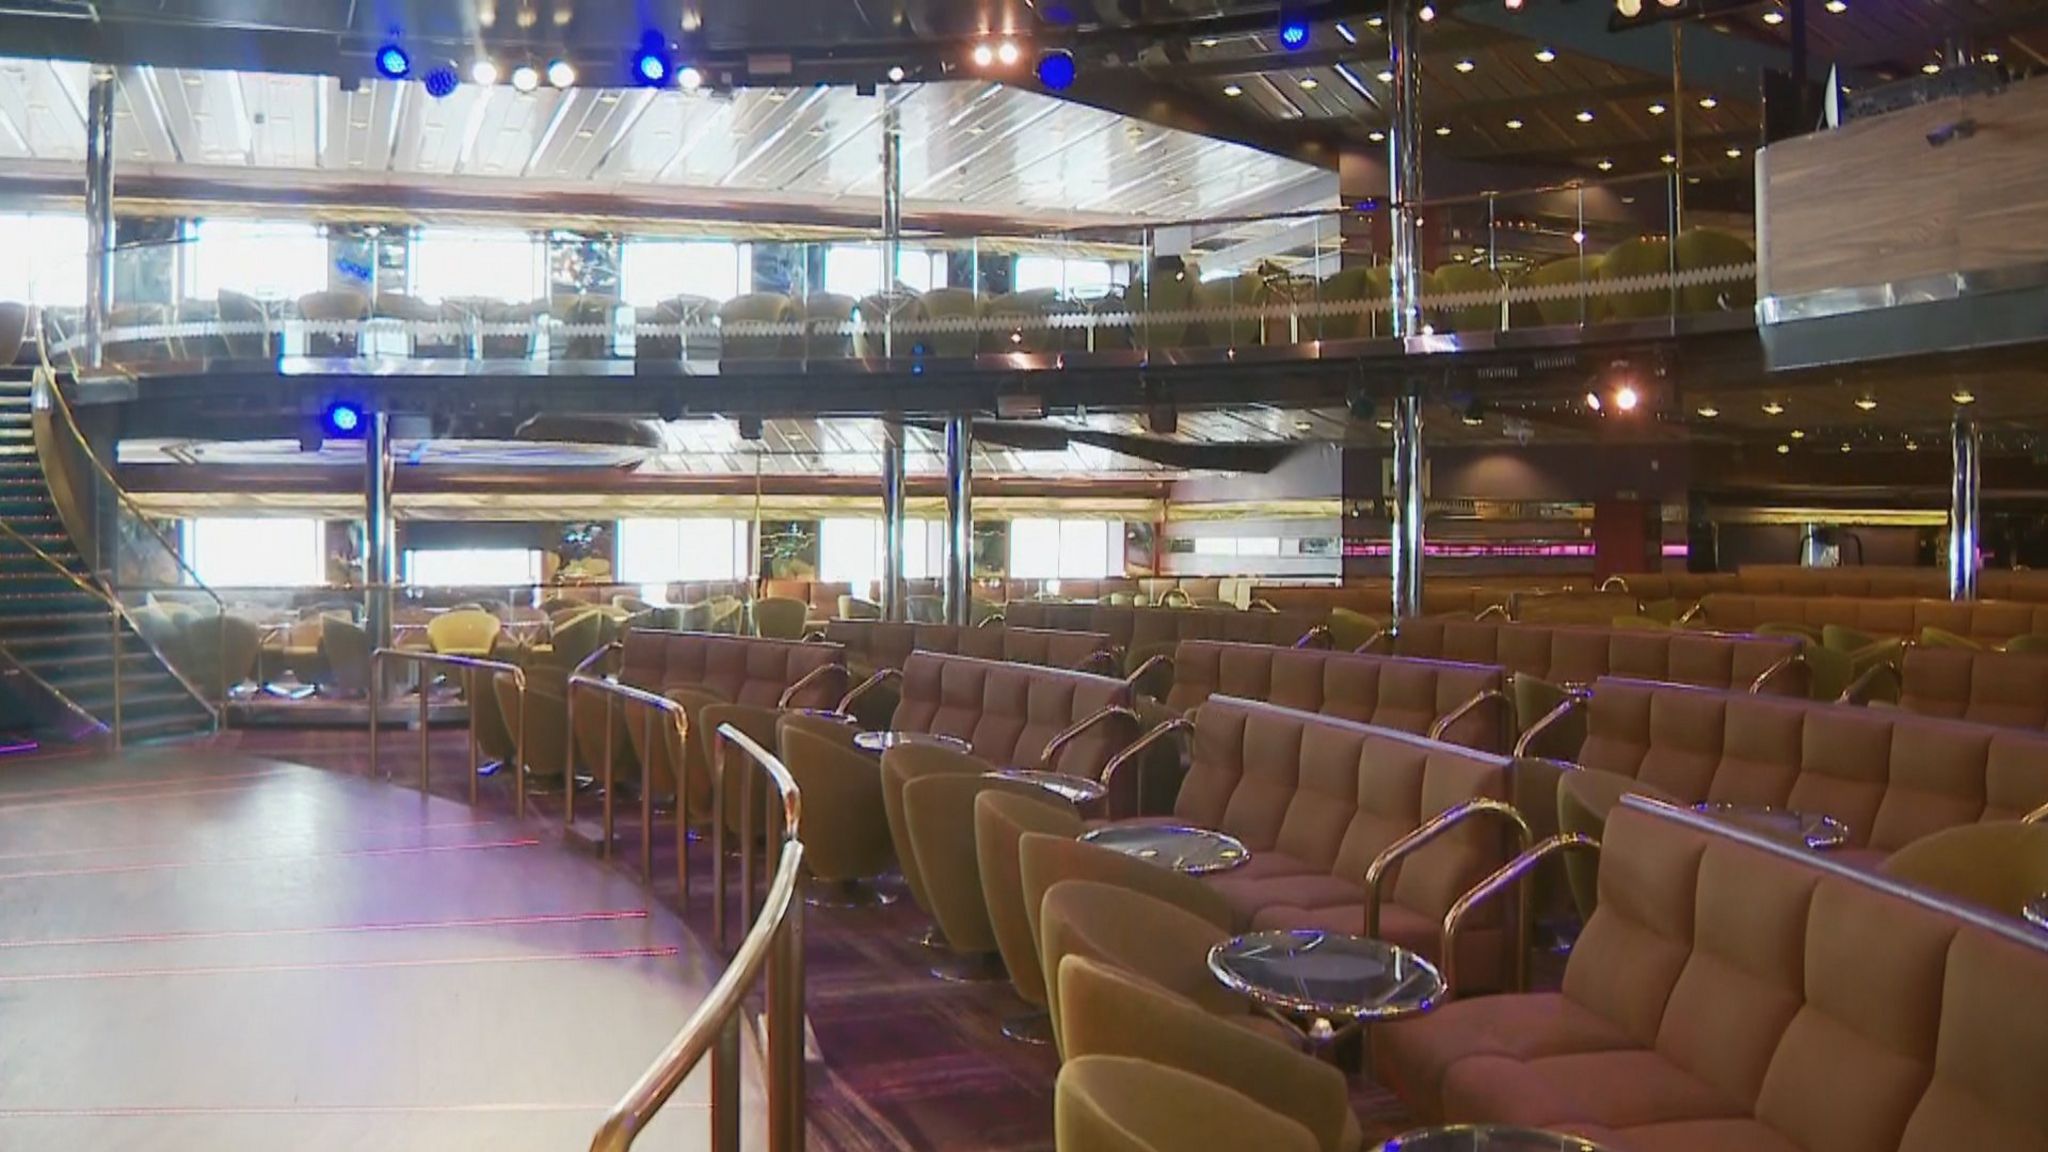 a communal seating space inside the cruise ship